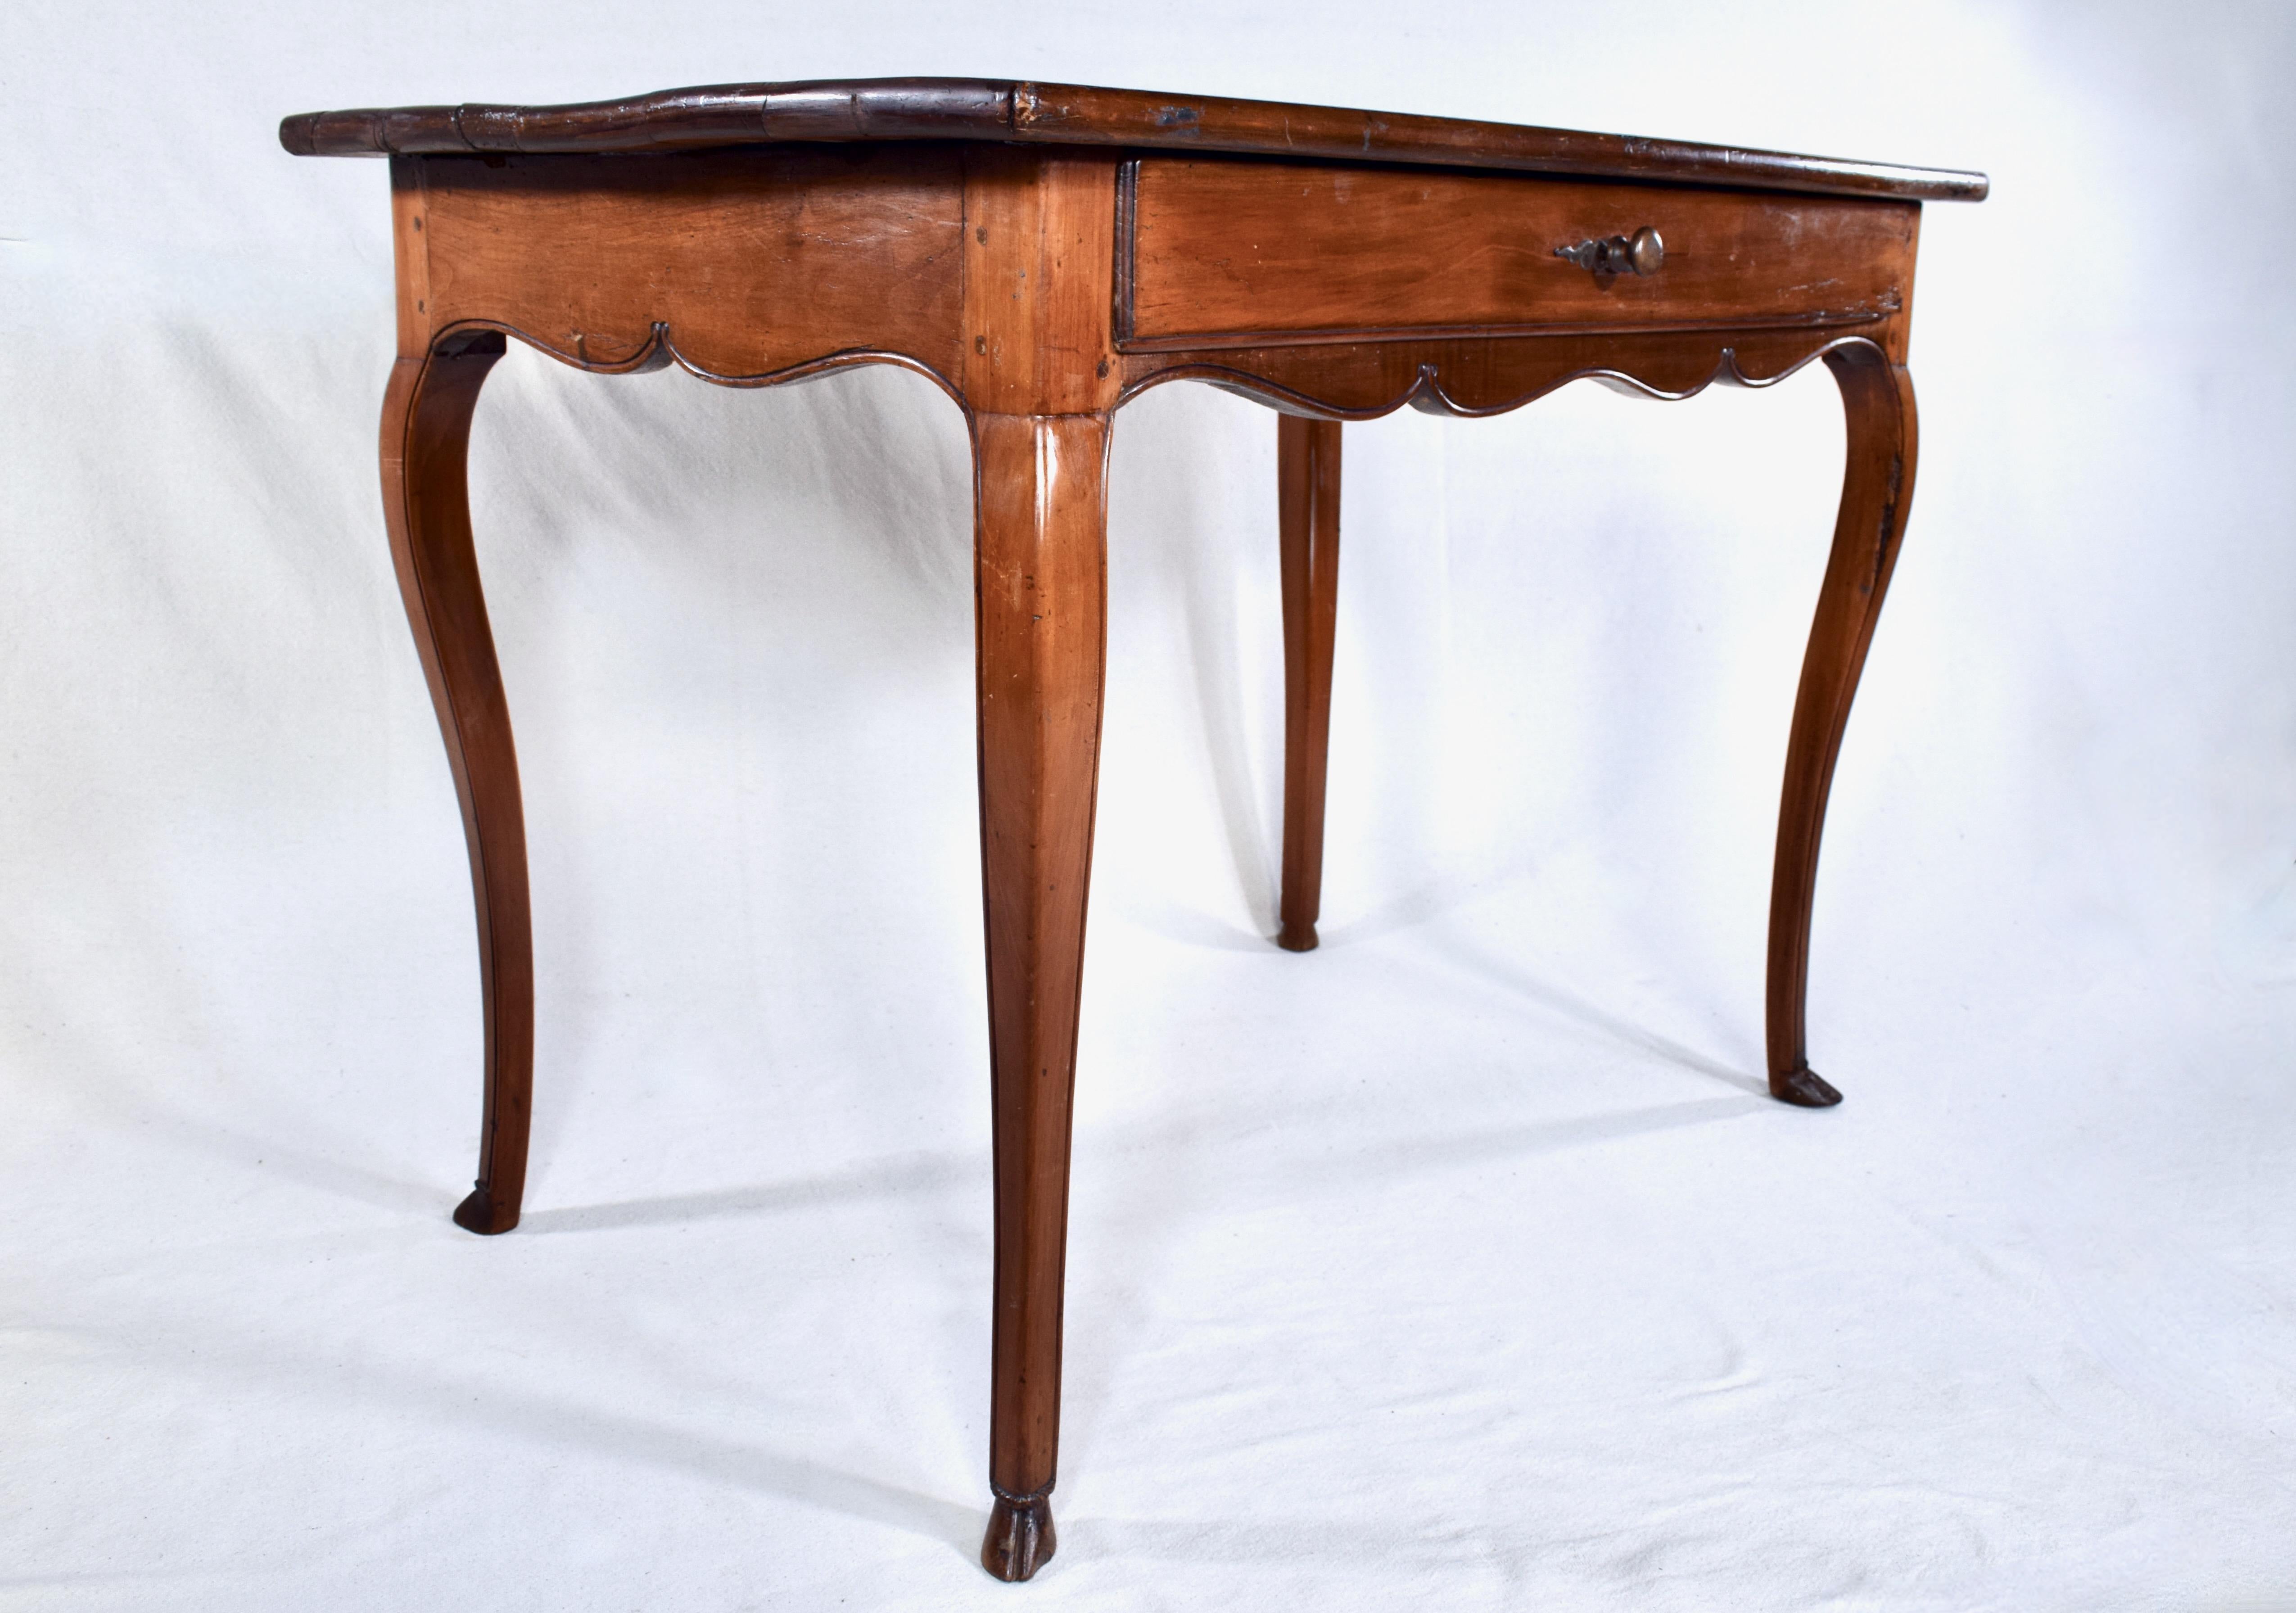 French Mid-18th Century Louis XV Period Petit Desk or Side Table For Sale 2